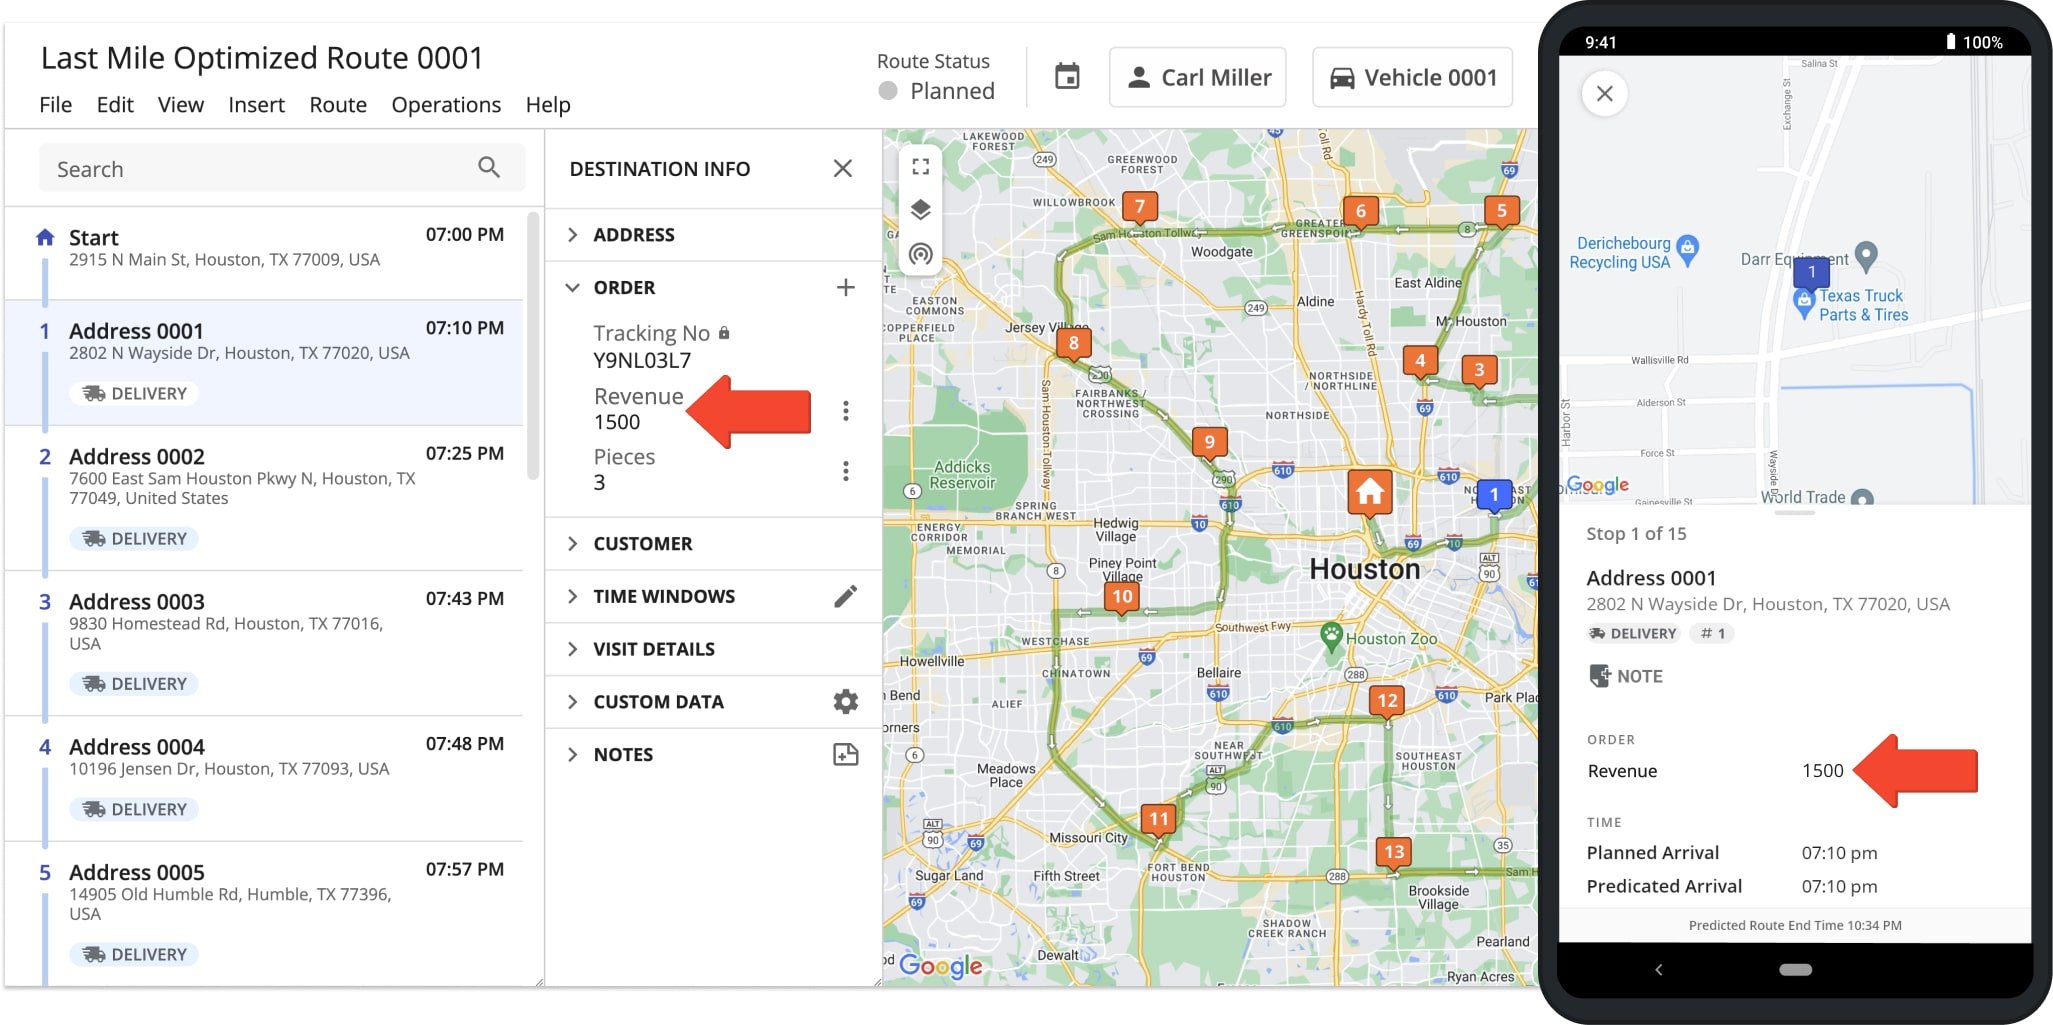 Changes made to routes or route destinations, such as modifying the Revenue Business Rule for an address are automatically synched to the connected devices of all respective users associated with the route or main Route4Me account.